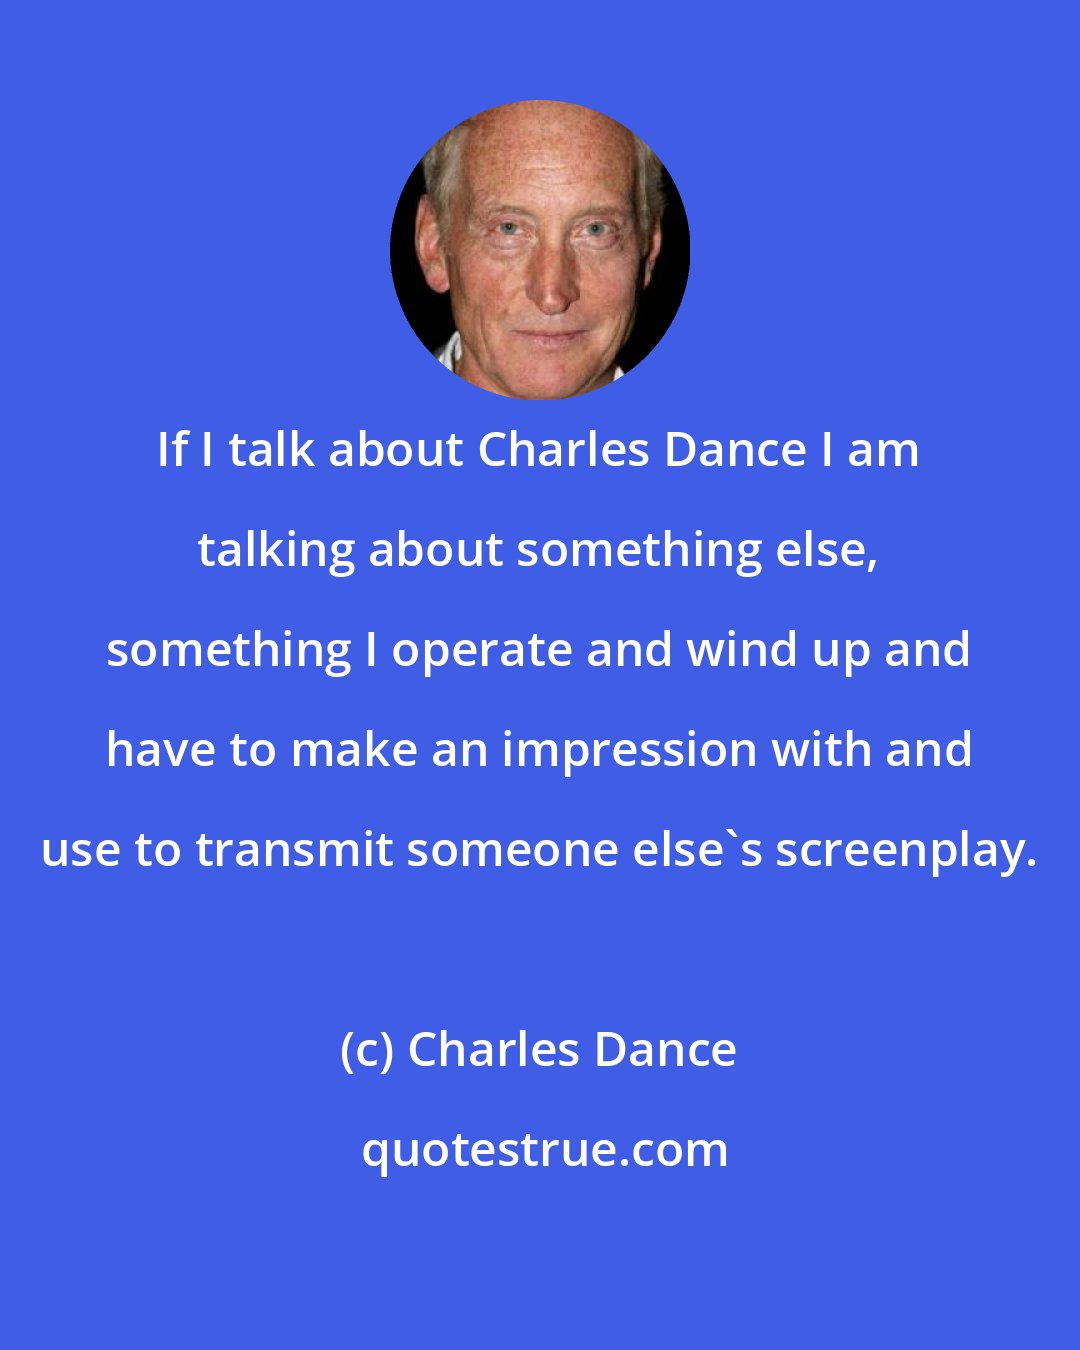 Charles Dance: If I talk about Charles Dance I am talking about something else, something I operate and wind up and have to make an impression with and use to transmit someone else's screenplay.